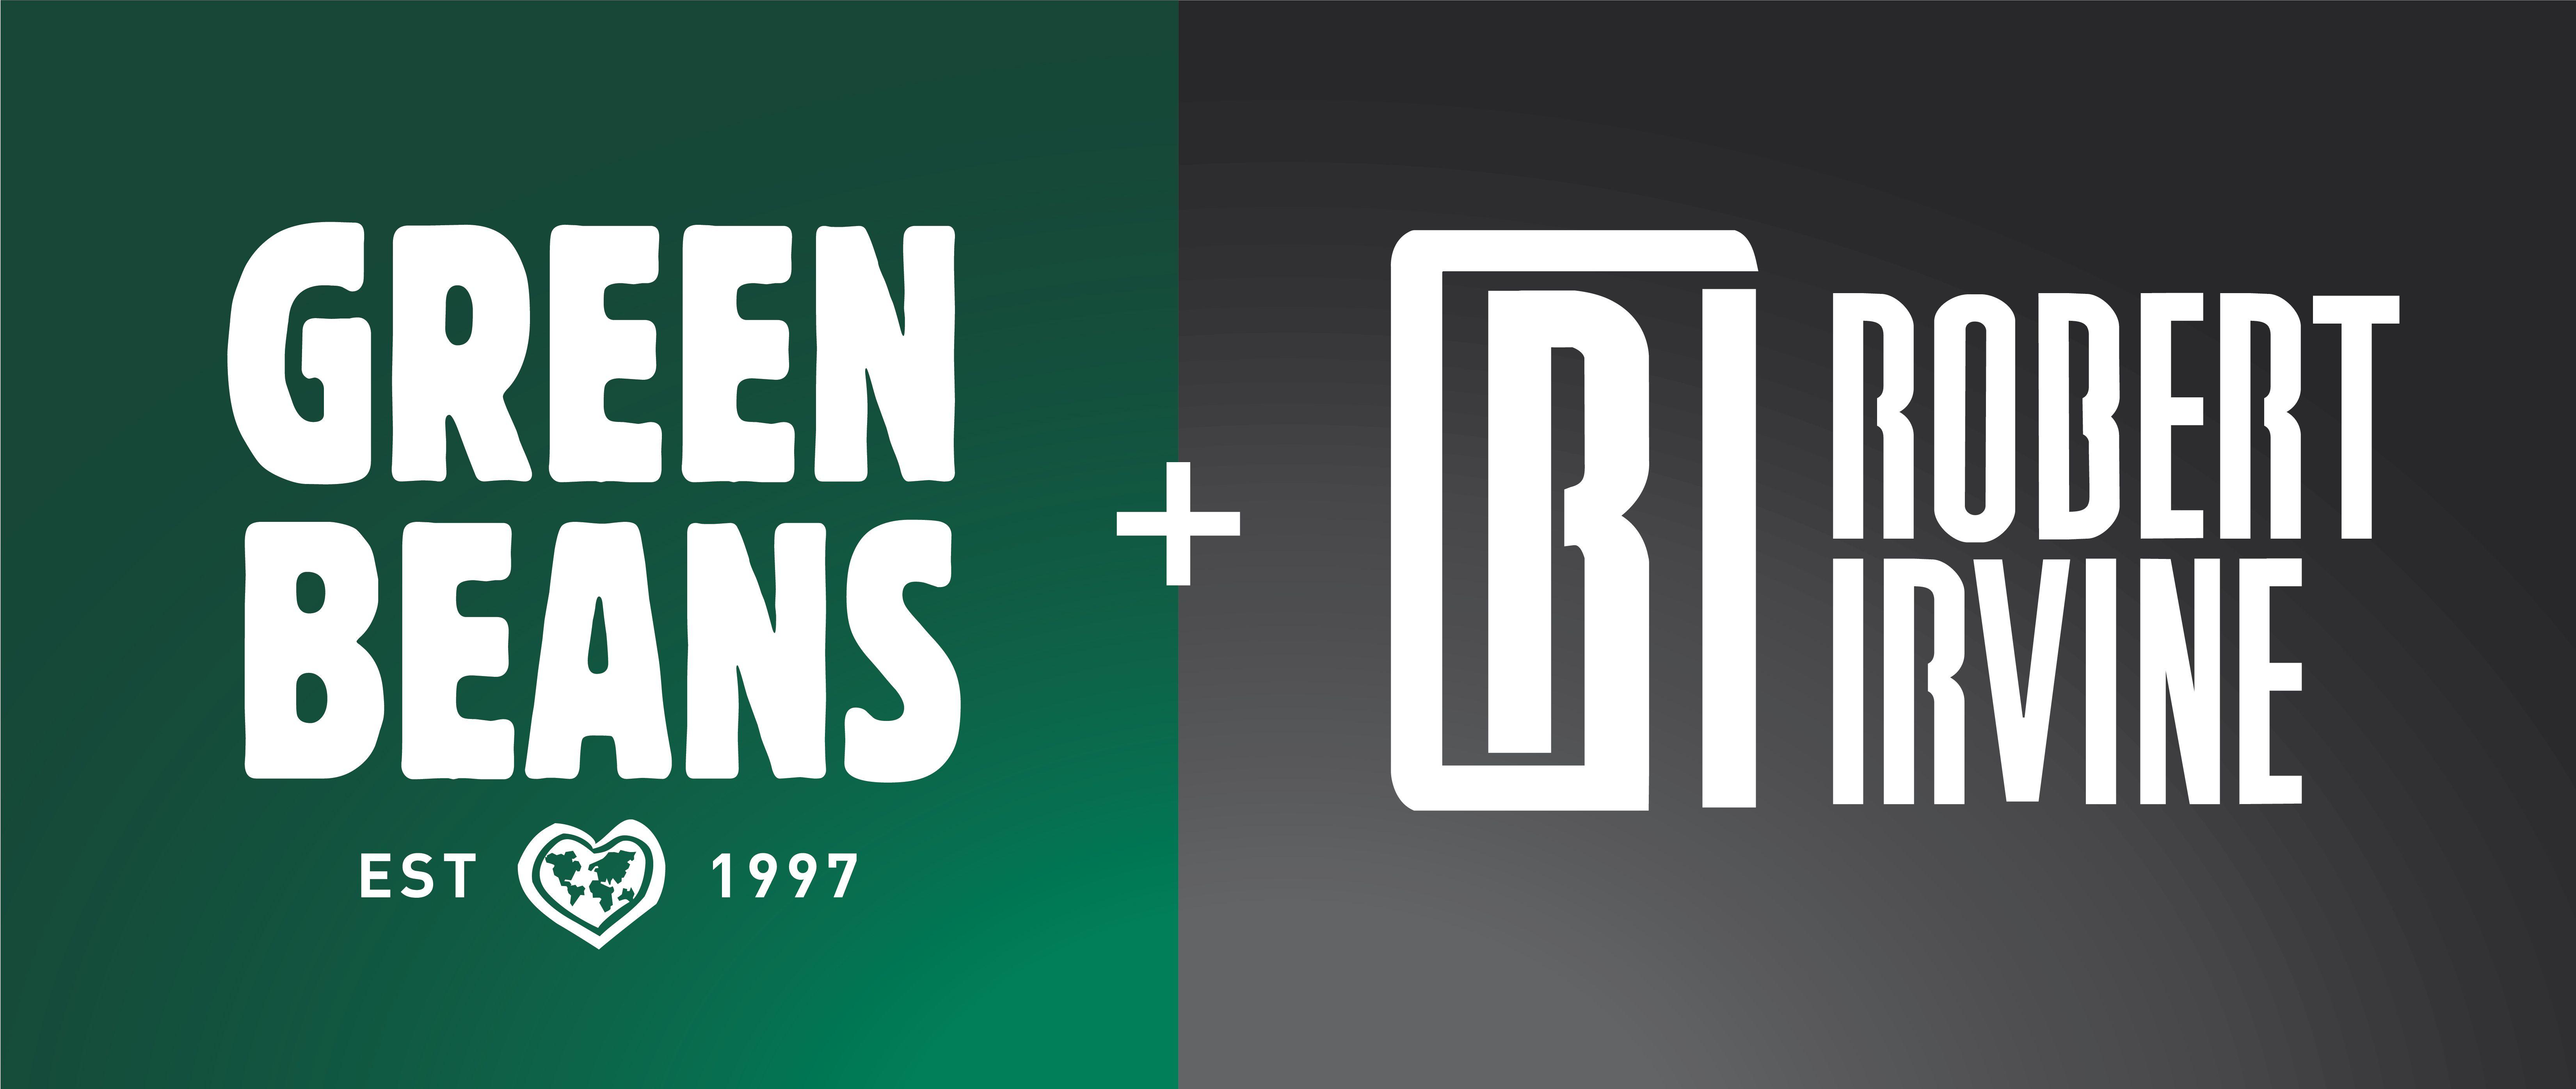 Green Beans Coffee Company Logo - Green Beans Coffee, an Elevate Gourmet Brands company, Announces ...